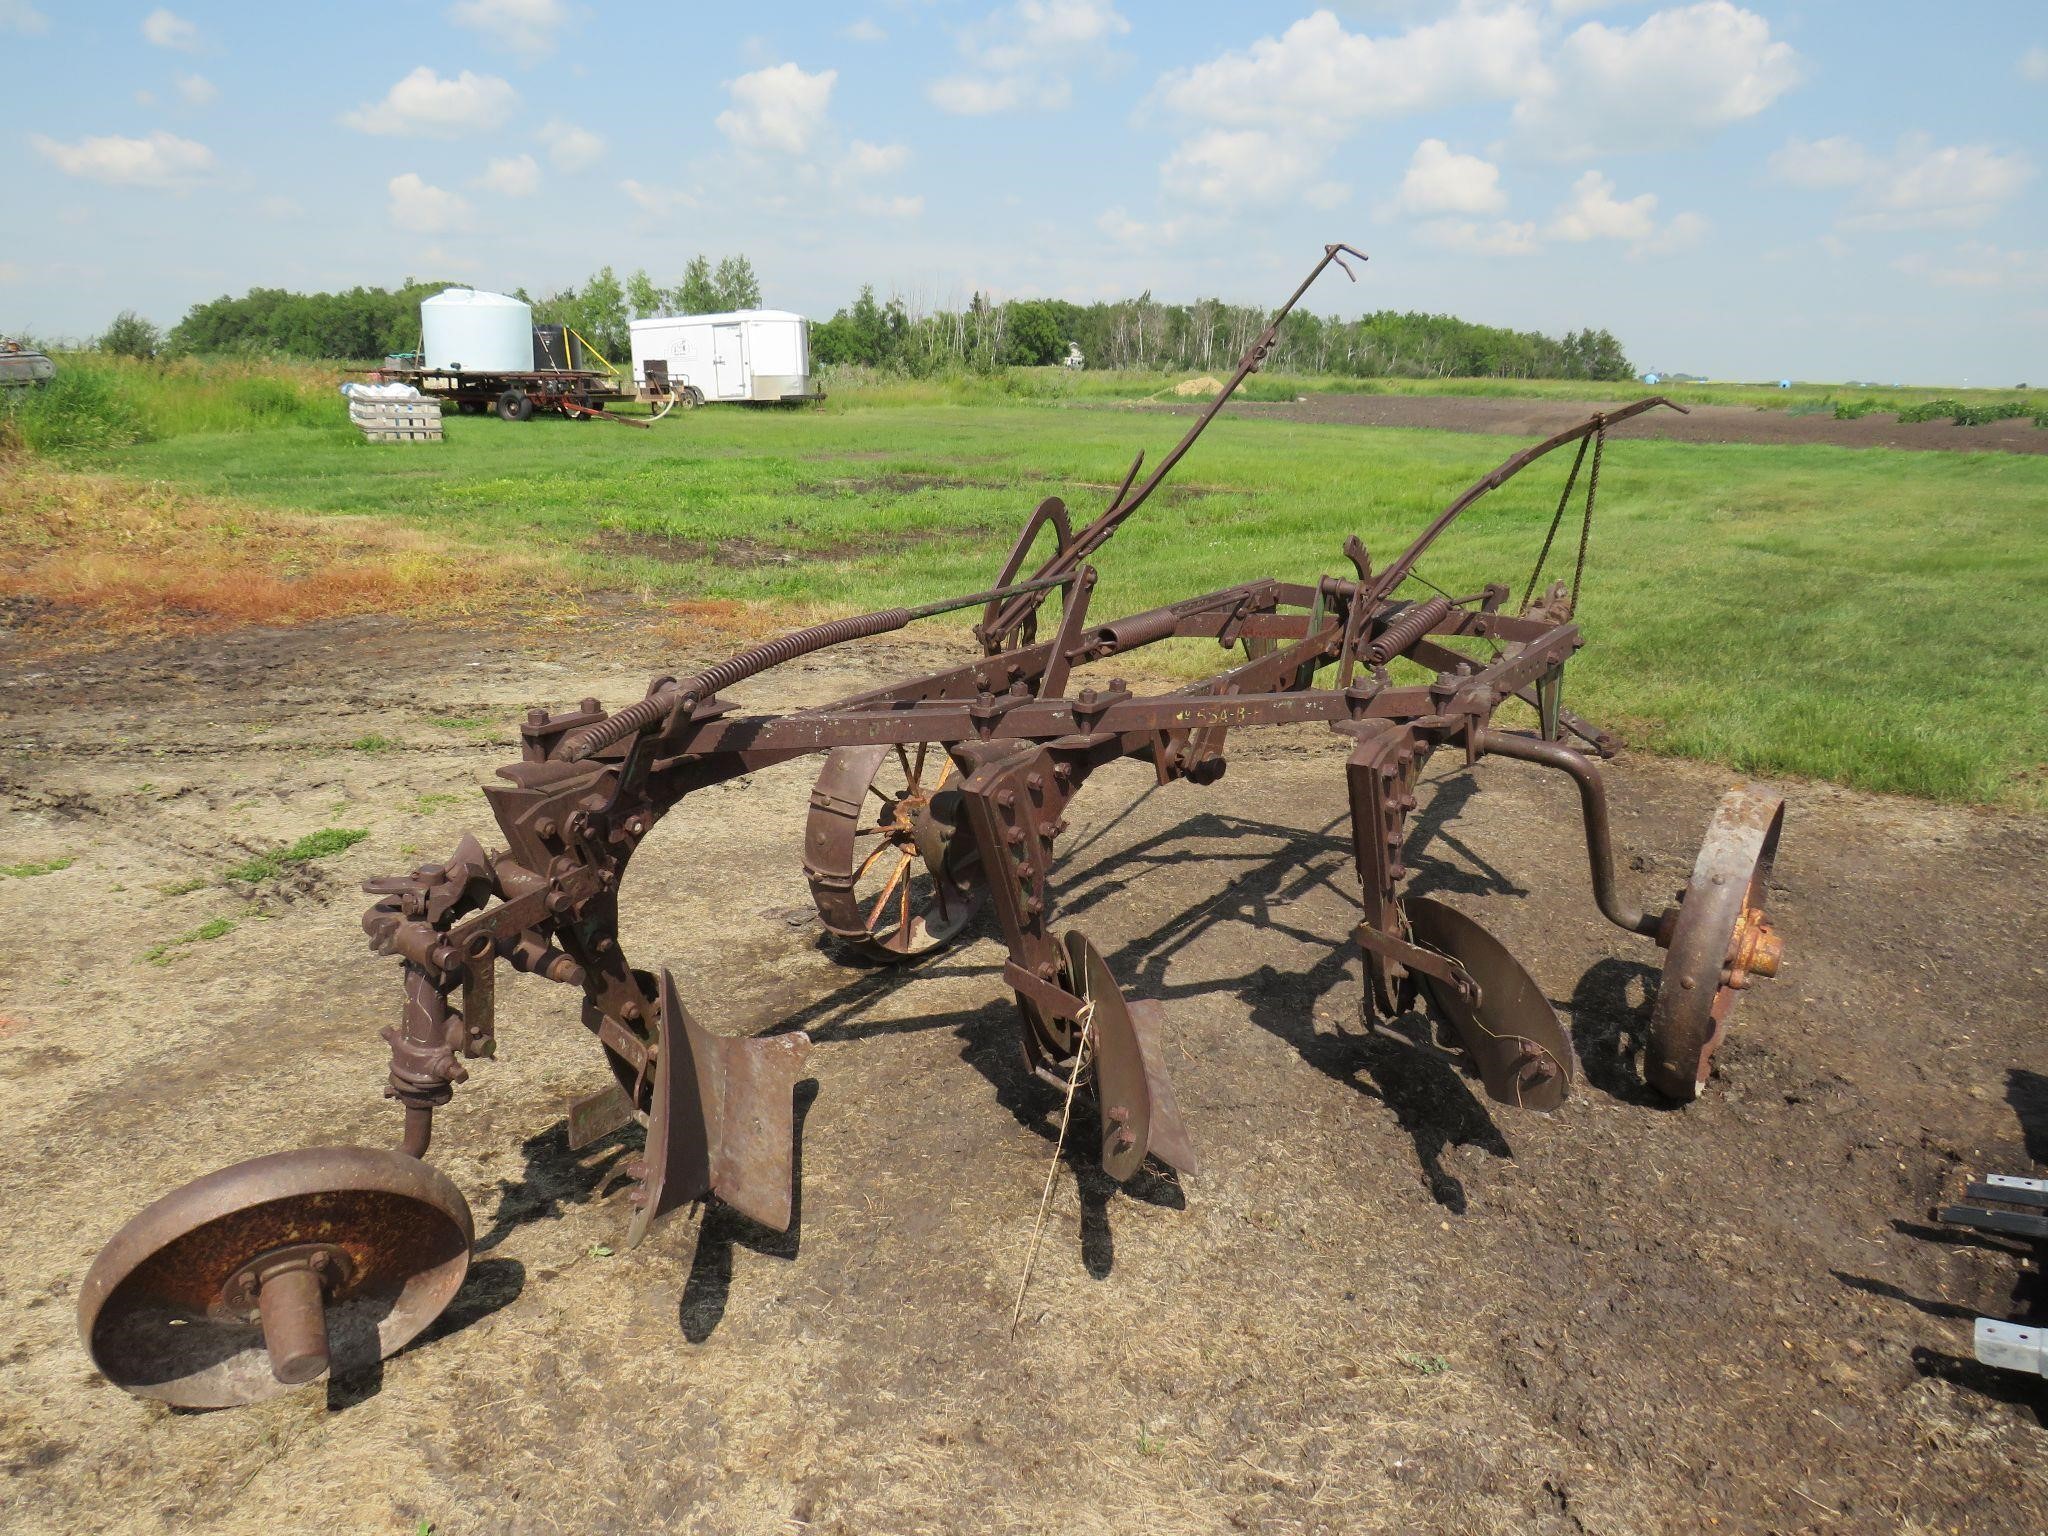 ANTIQUE JD? 3 BOTTOM PLOW / EXTRA SHEARS